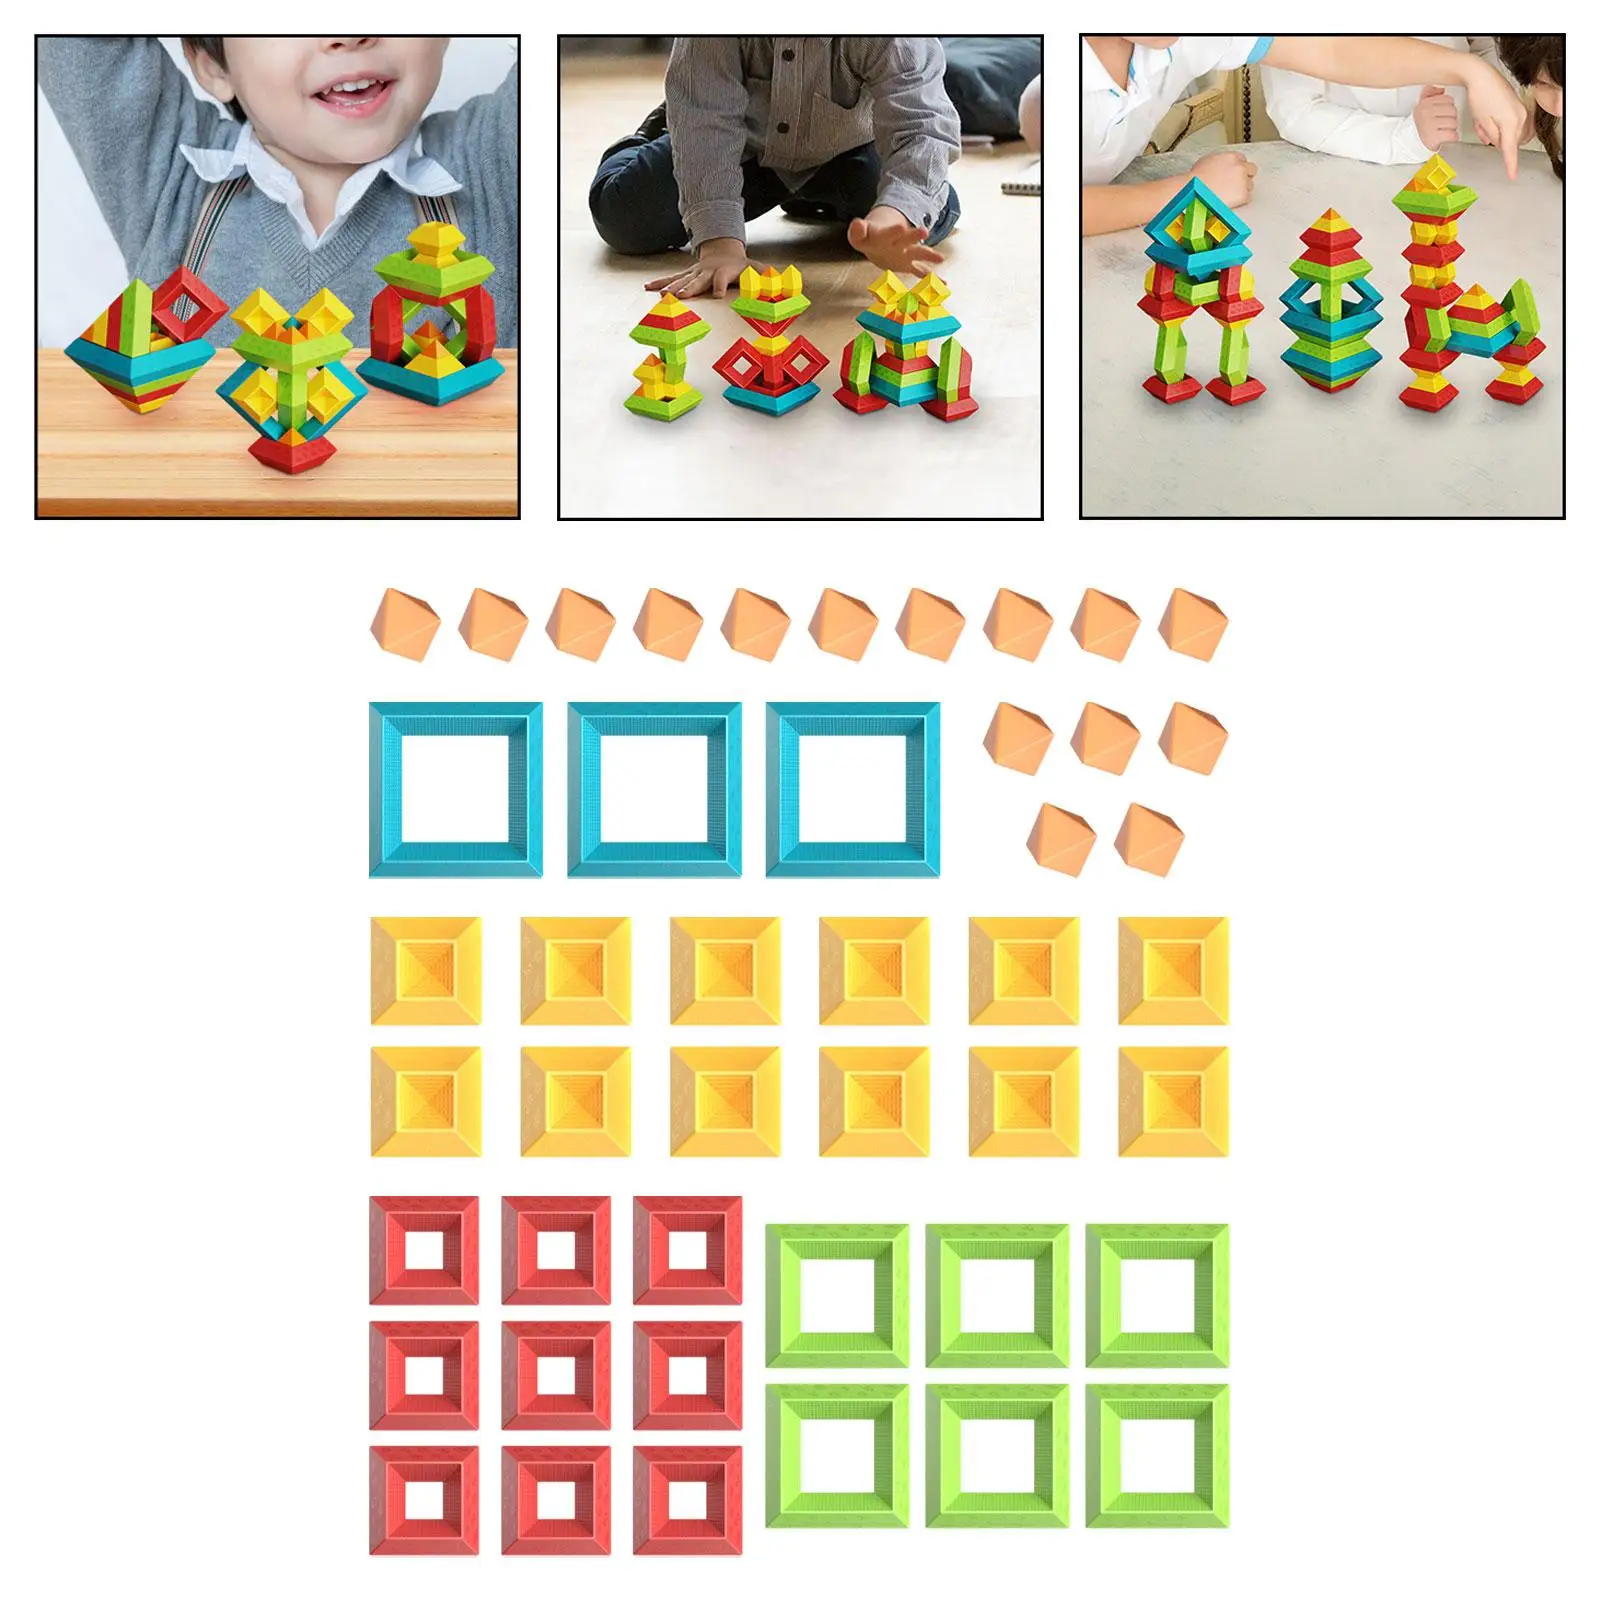 Baby Stacking Toys Preschool Learning Activities Pyramid Building Toys for 1 2 3 4 5 Year Old Kids Boys Girls Toddlers Children